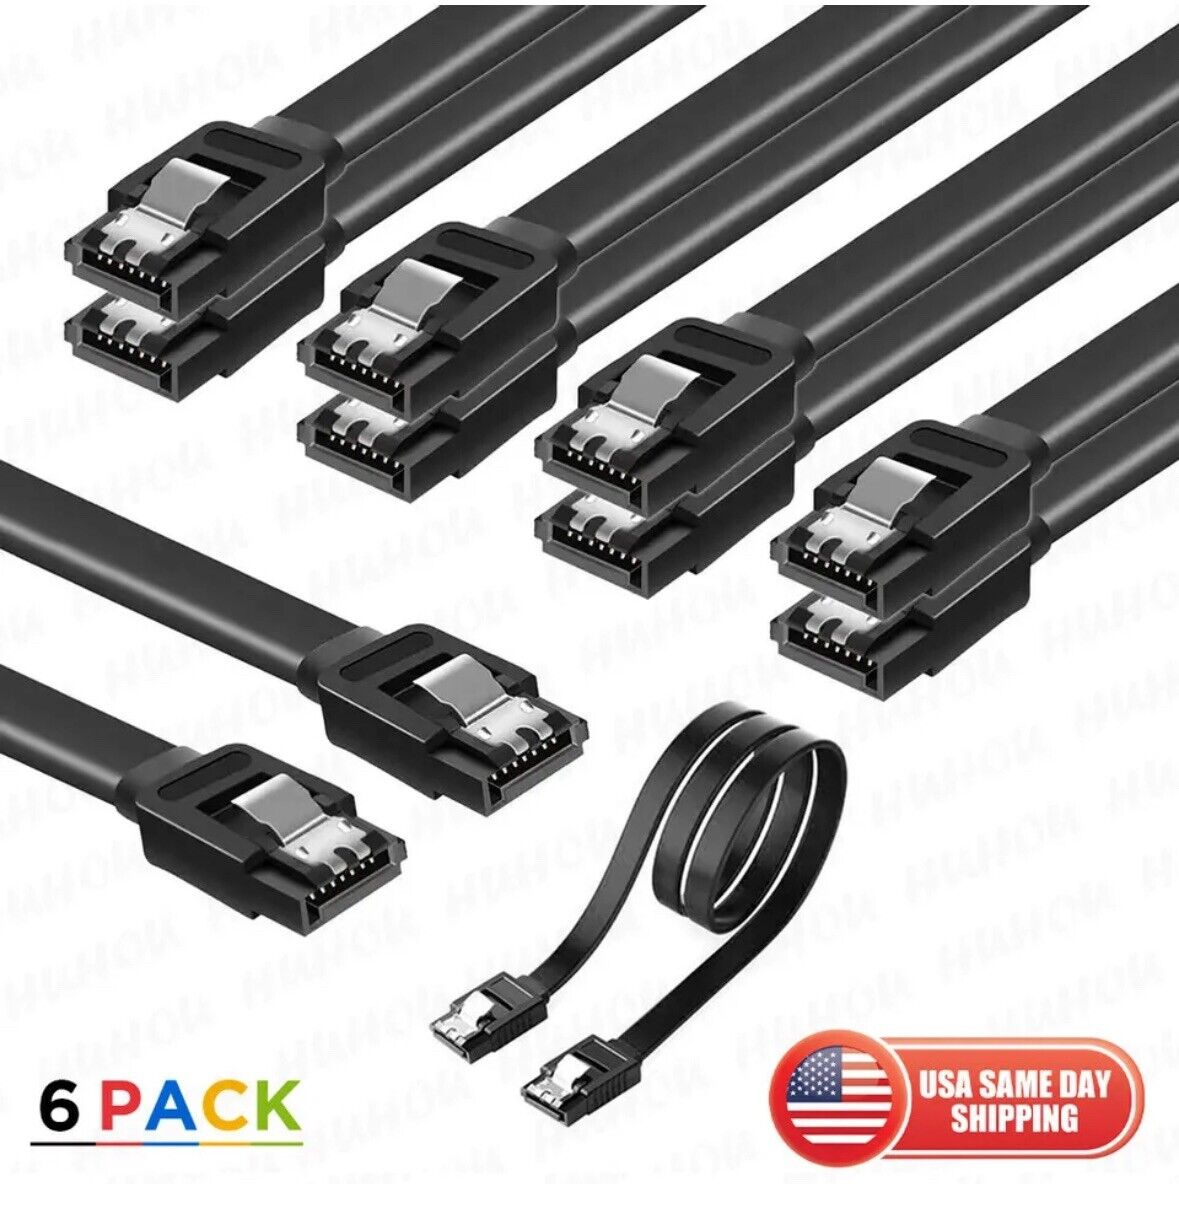 6 pack SATA Cable III 6Gbps Straight HDD SDD Data Cable with Locking Latch